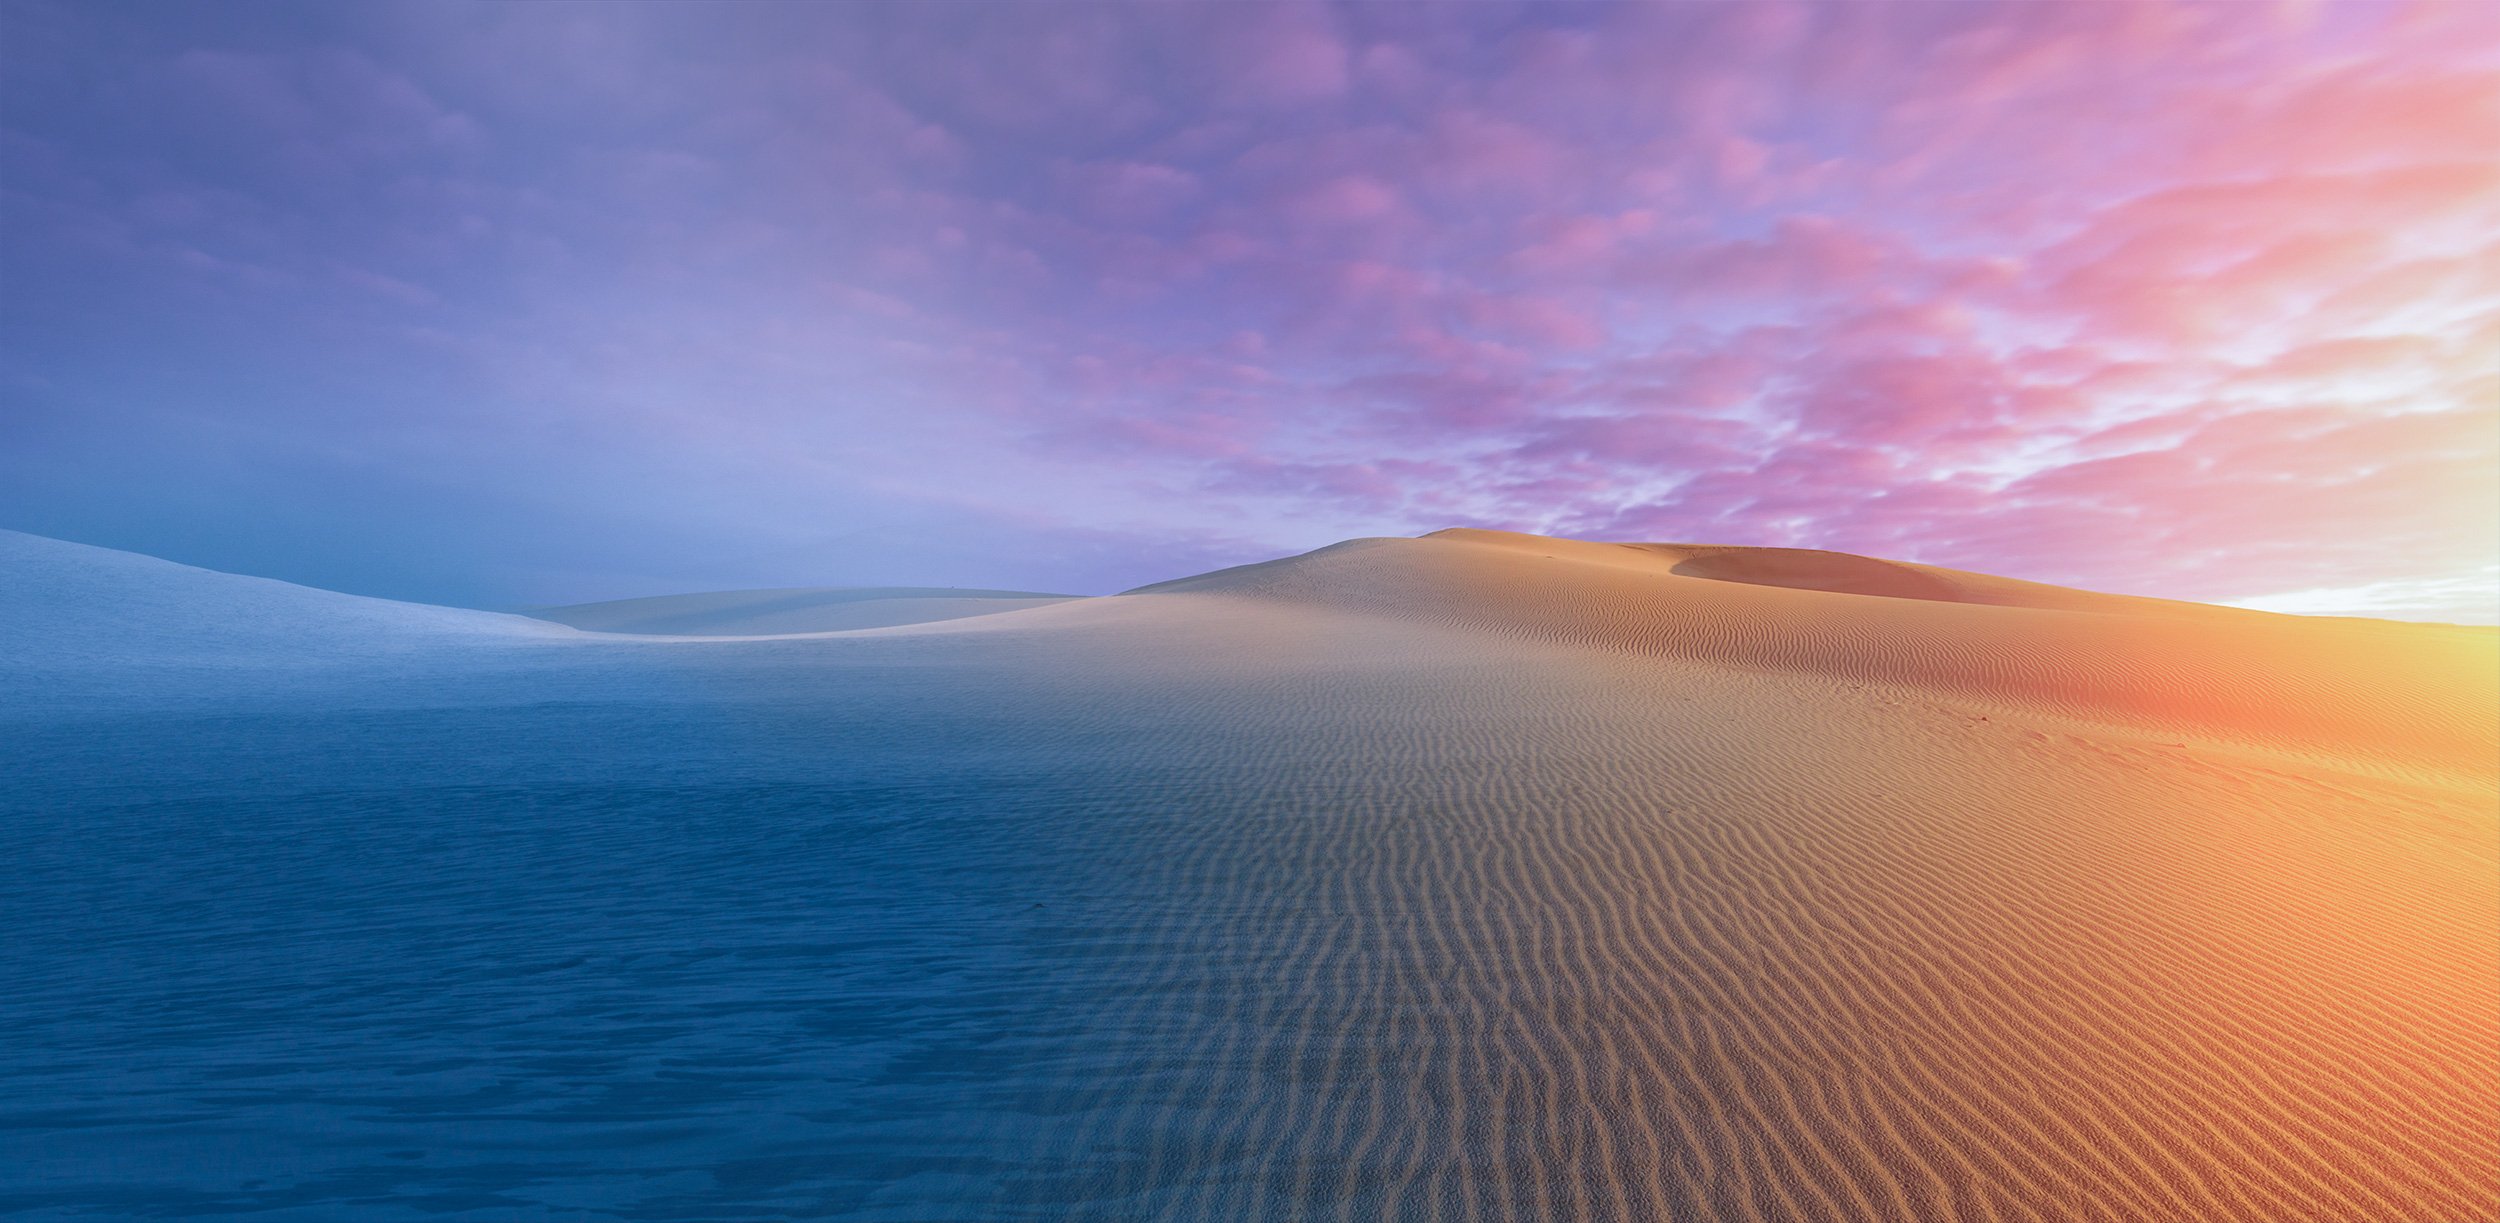 Ambient image blend of snowy mountains to the left, blending into sand dunes on the right.